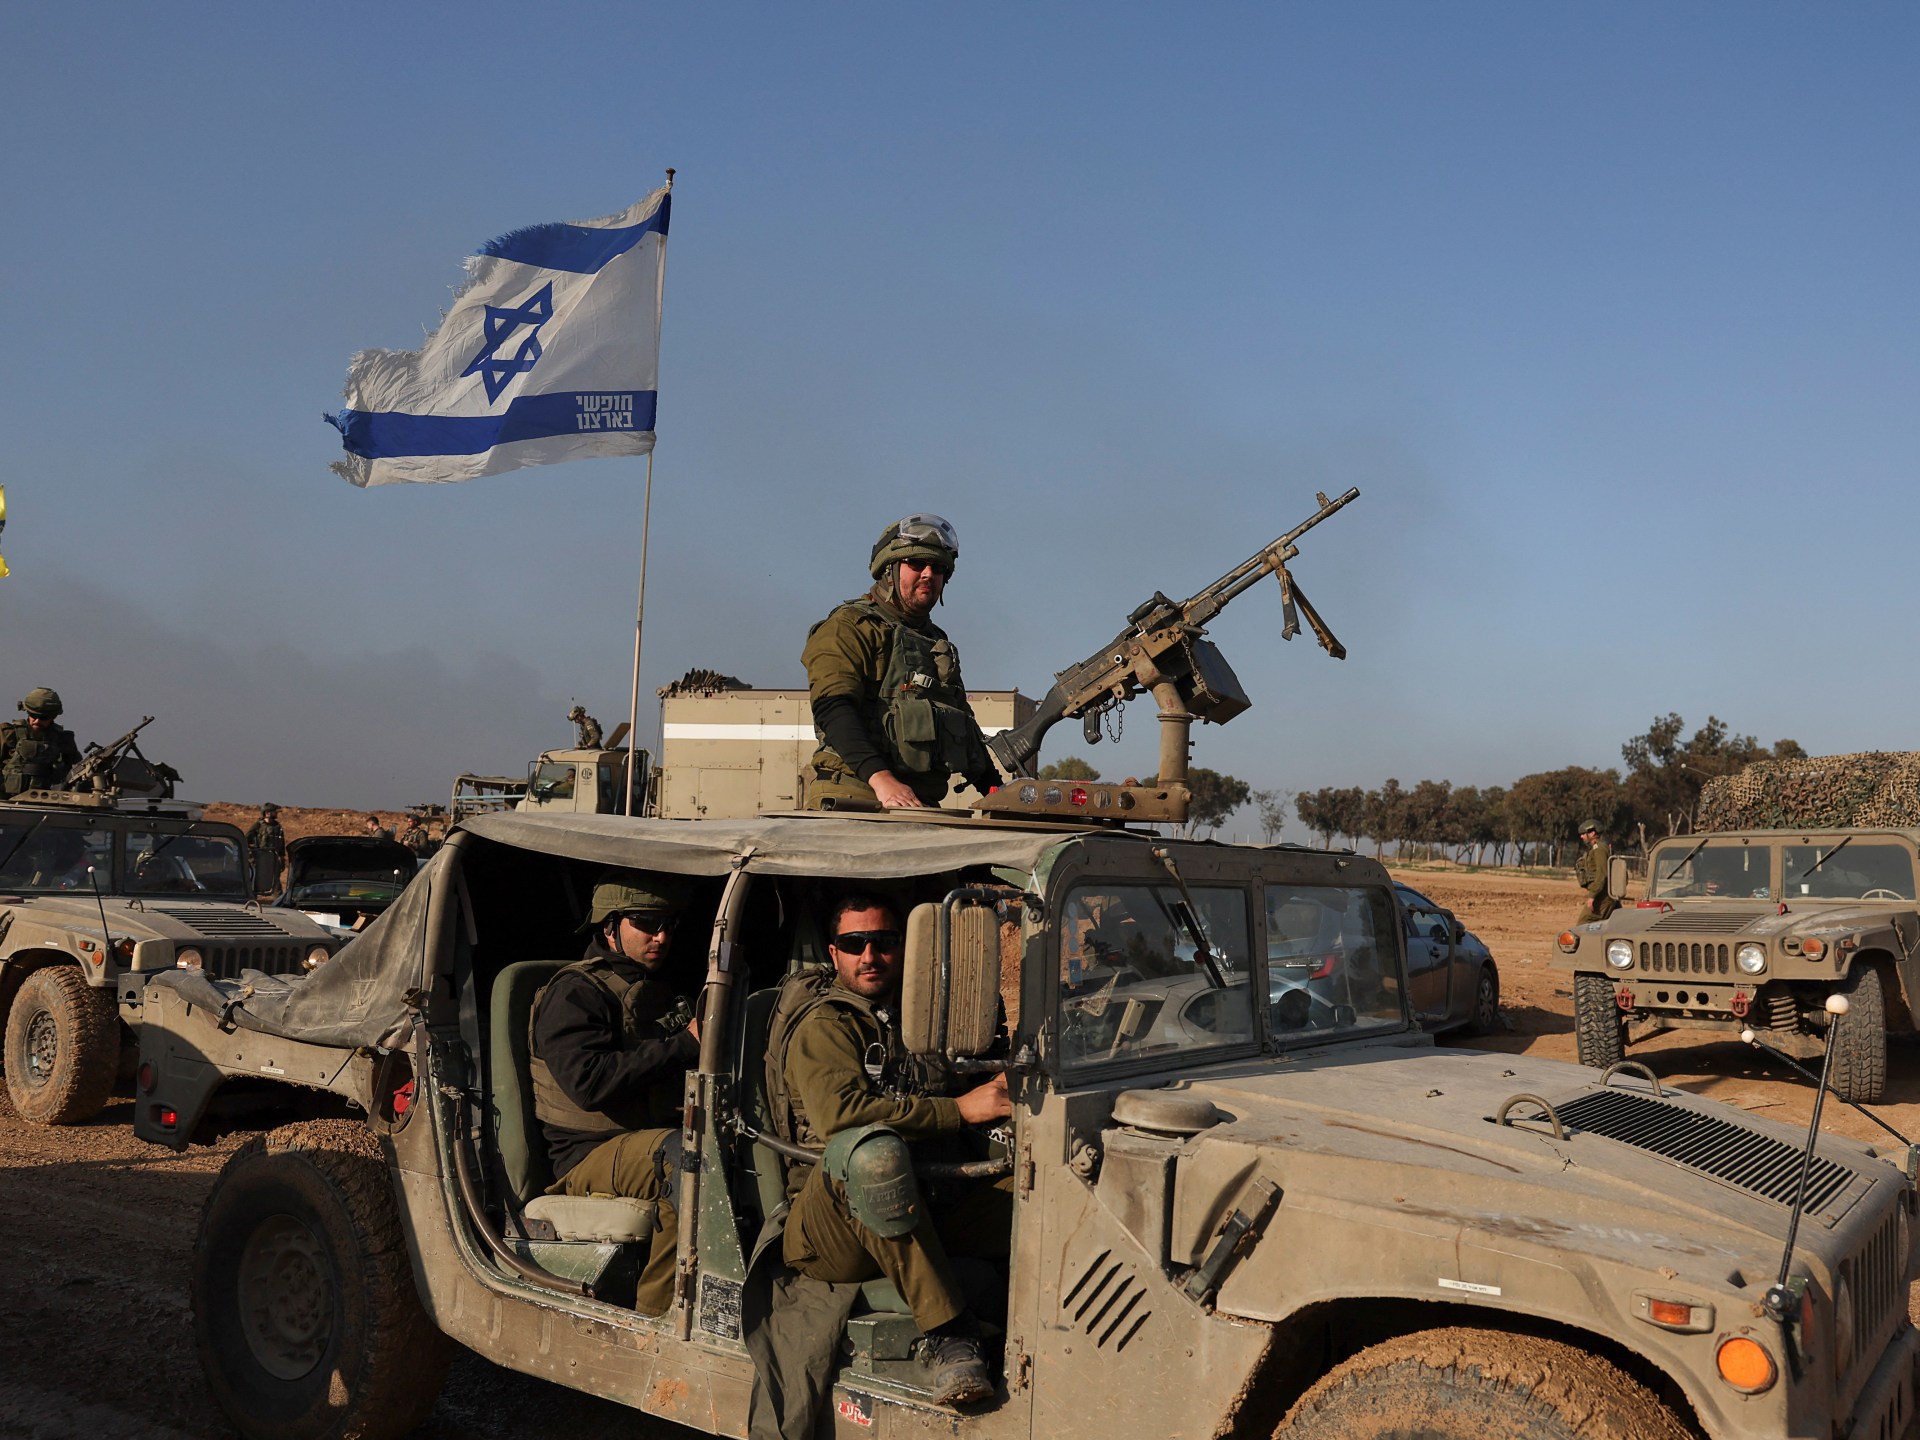 Israel says Gaza war is like WWII. Experts say it’s ‘justifying brutality’ | Israel-Palestine conflict News